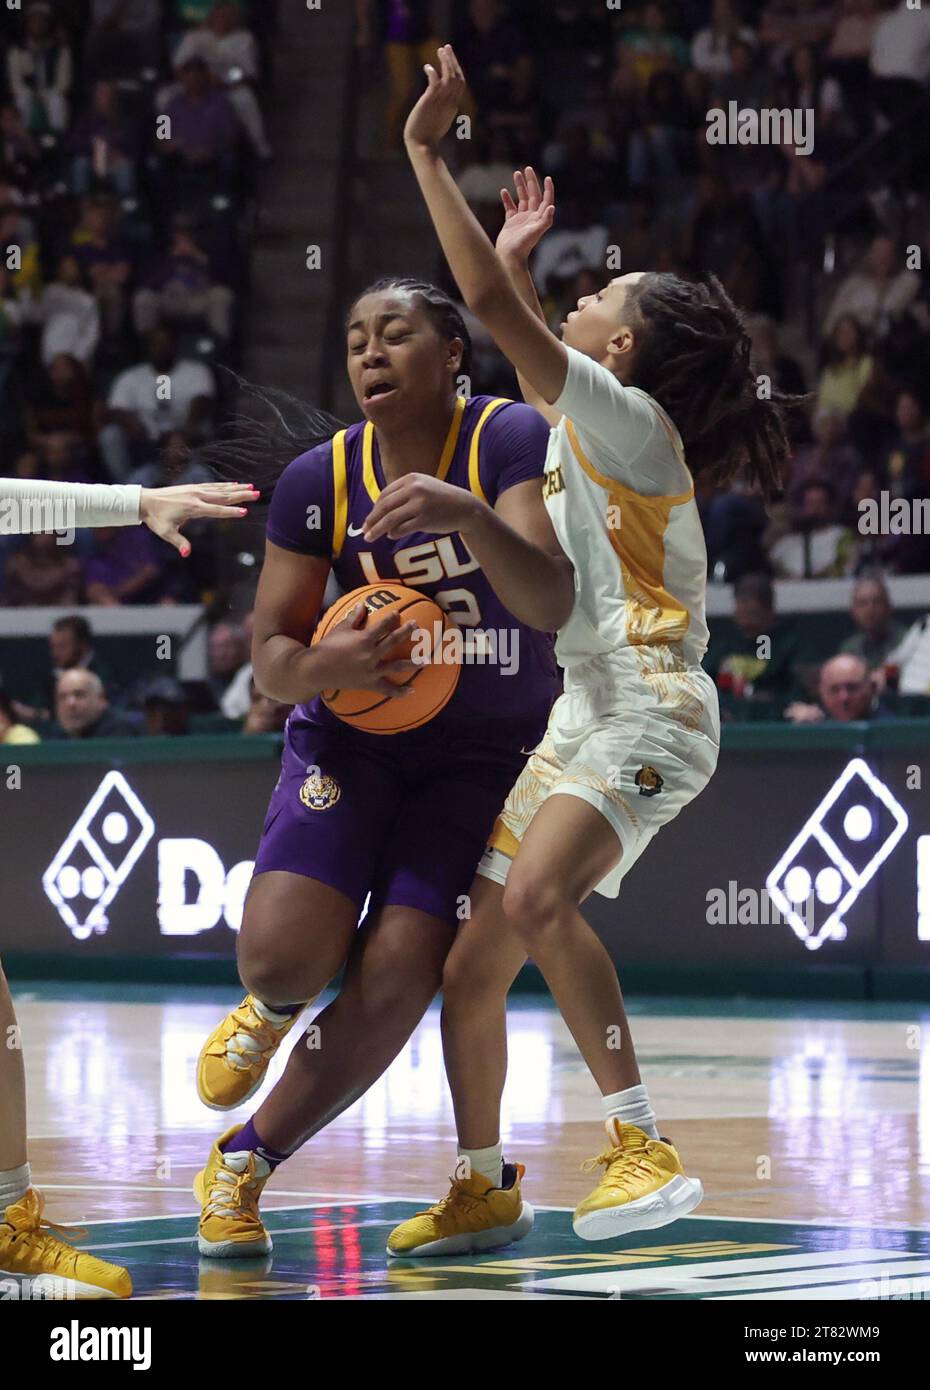 Hammond, USA. 17th Nov, 2023. LSU Lady Tigers guard Mikaylah Williams (12) makes a hard move against SE Louisiana Lady Lions guard Avari Berry (11) during a women's college basketball game at the University Center in Hammond, Louisiana on Friday, November 17, 2023. (Photo by Peter G. Forest/Sipa USA) Credit: Sipa USA/Alamy Live News Stock Photo